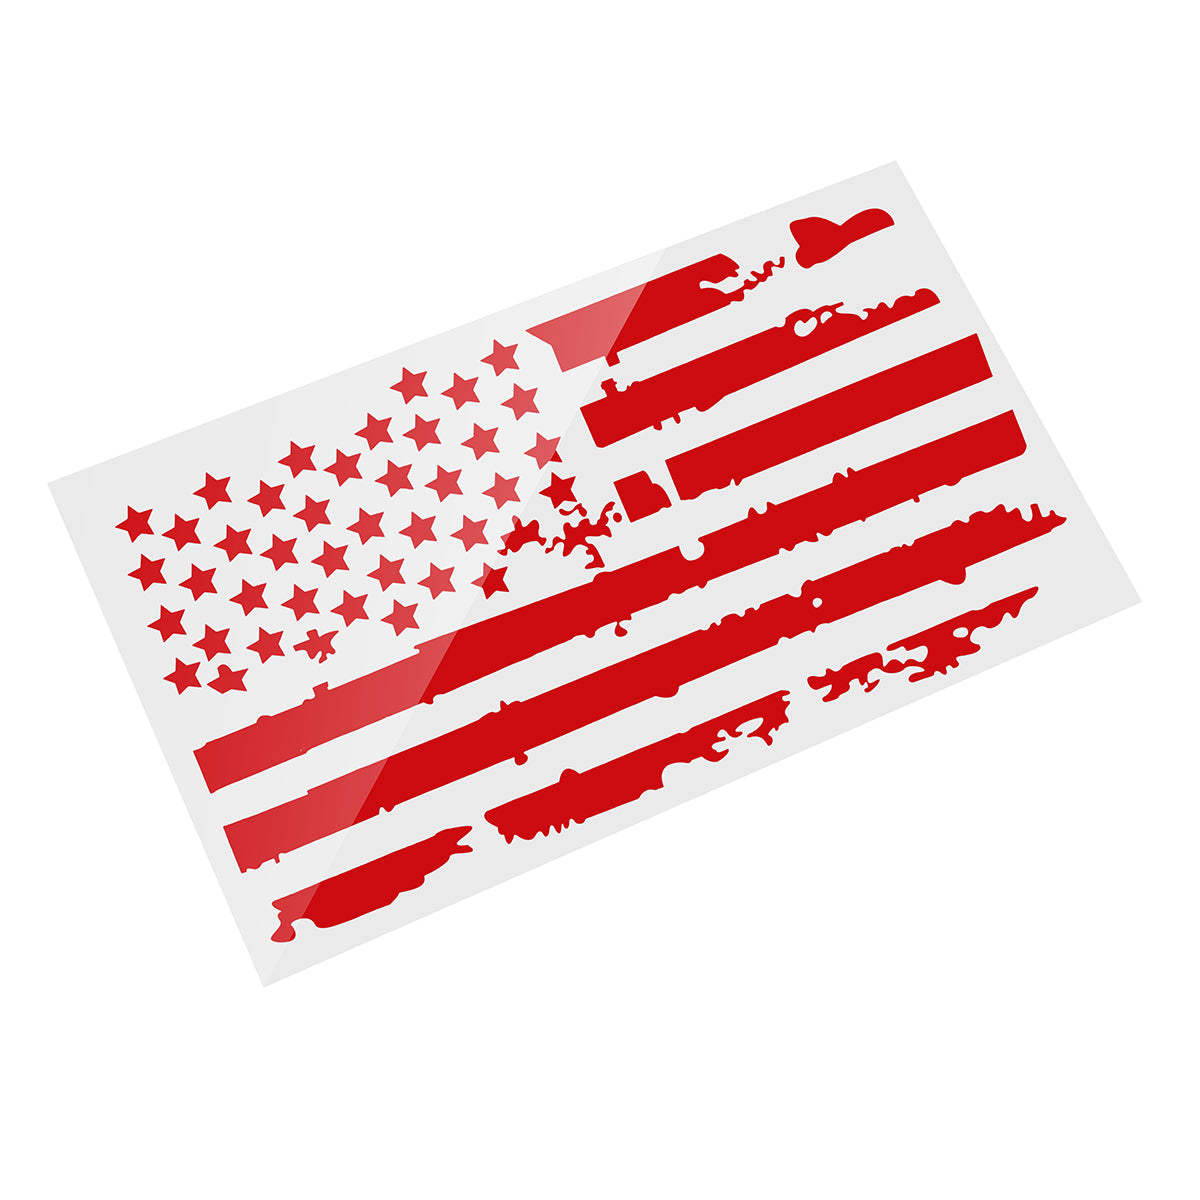 Firebrick 20X35 Inches USA Flag Car Hood Stickers Vinyl Auto Cover Truck Decals Universal